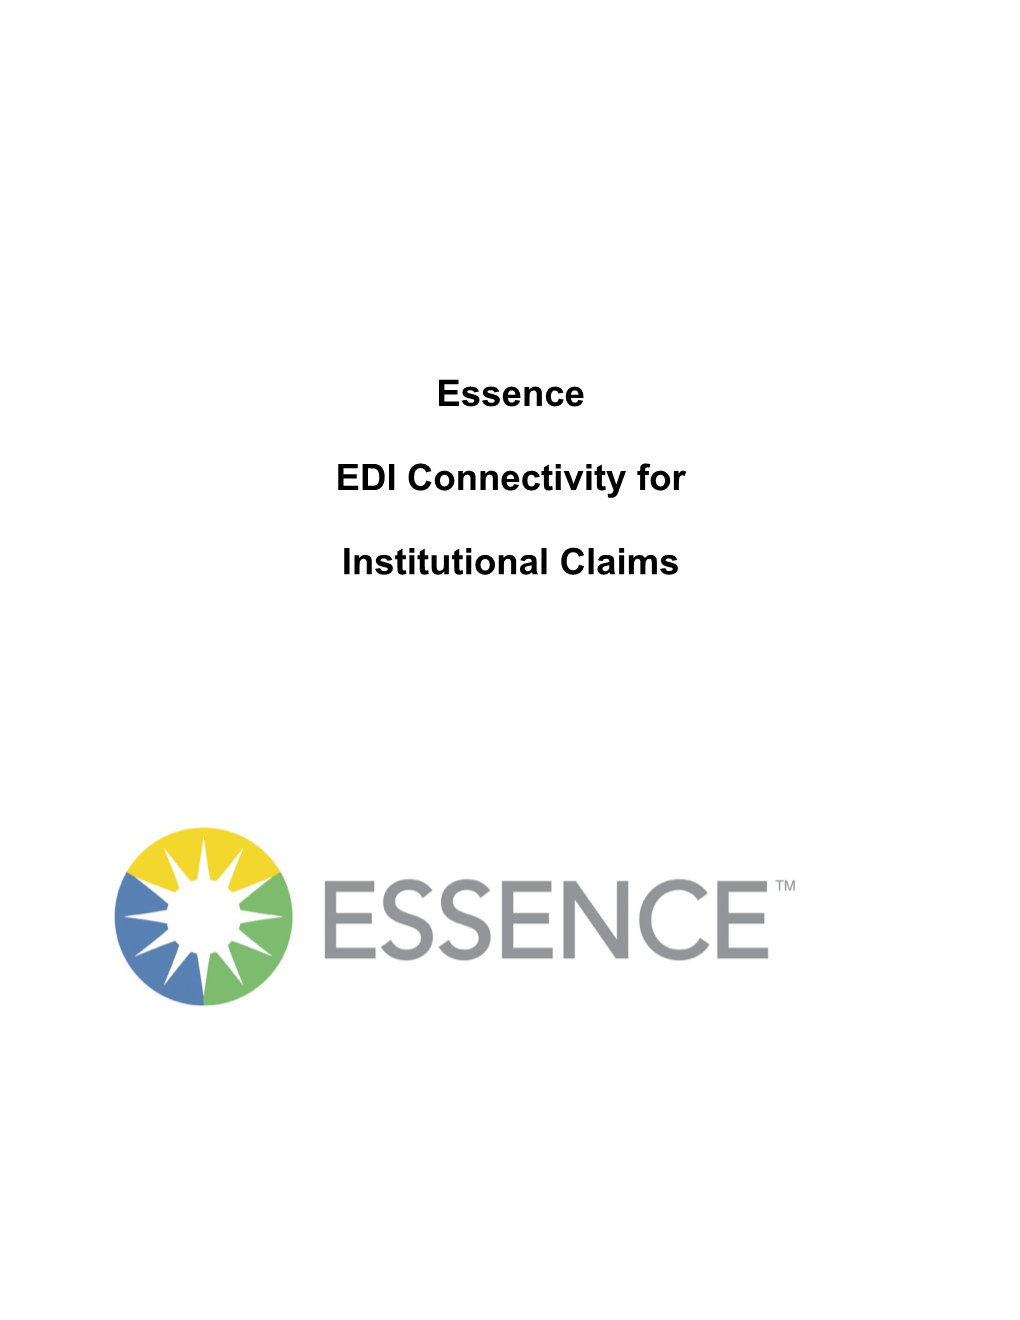 Essence EDI Connectivity for Institutional Claims